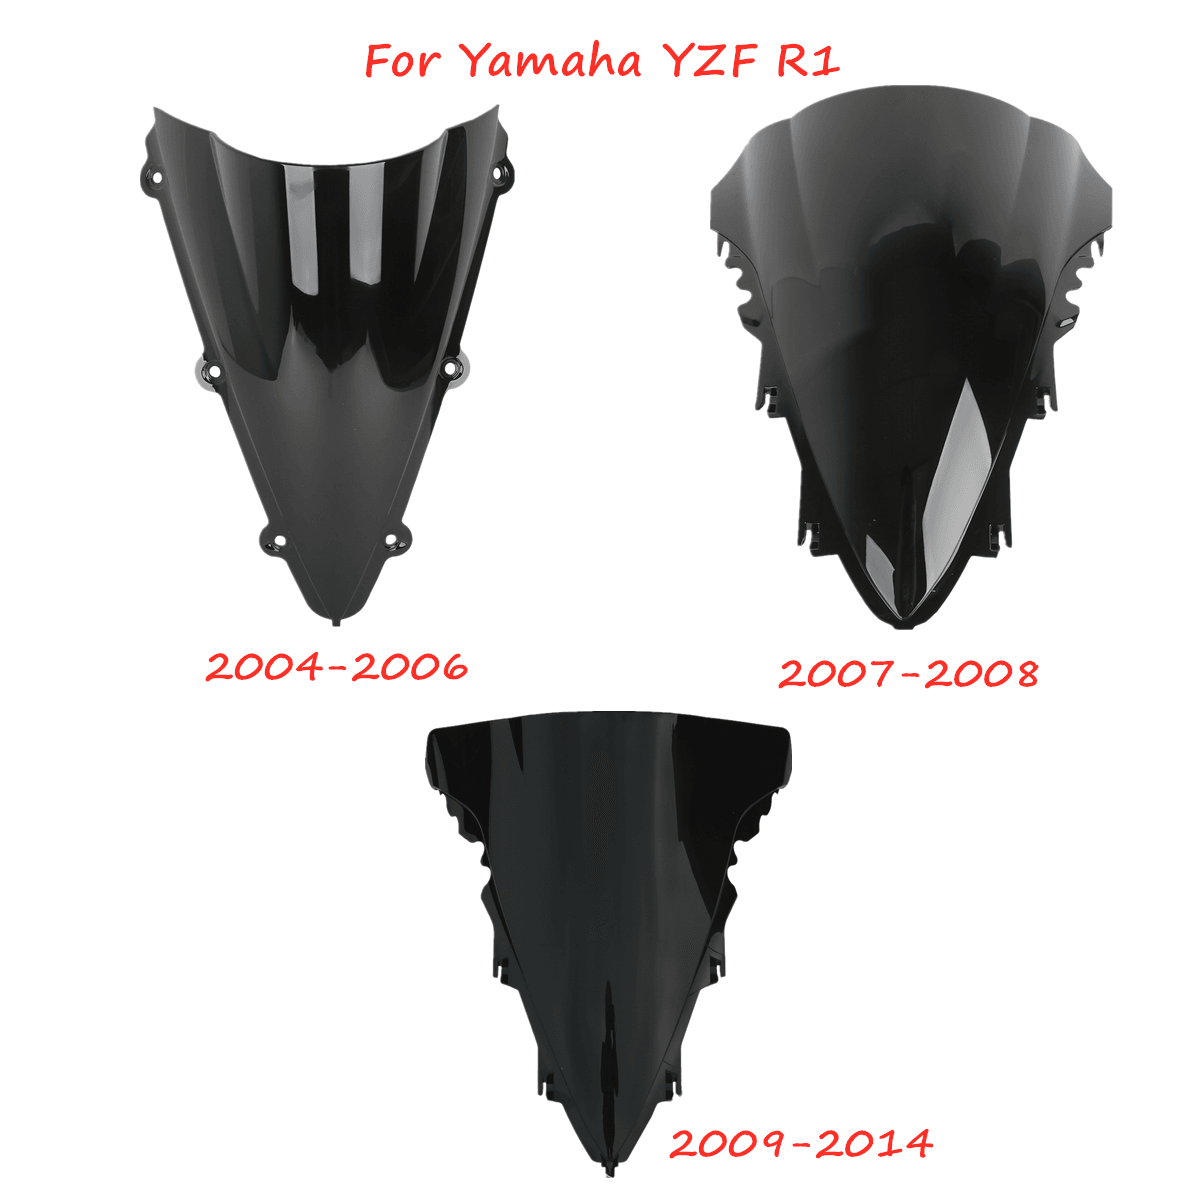 Windshield Windscreen For Yamaha YZFR1 YZF R1 YZF-R1 2004-2014 04-06/07-08/09-14 - Moto Life Products